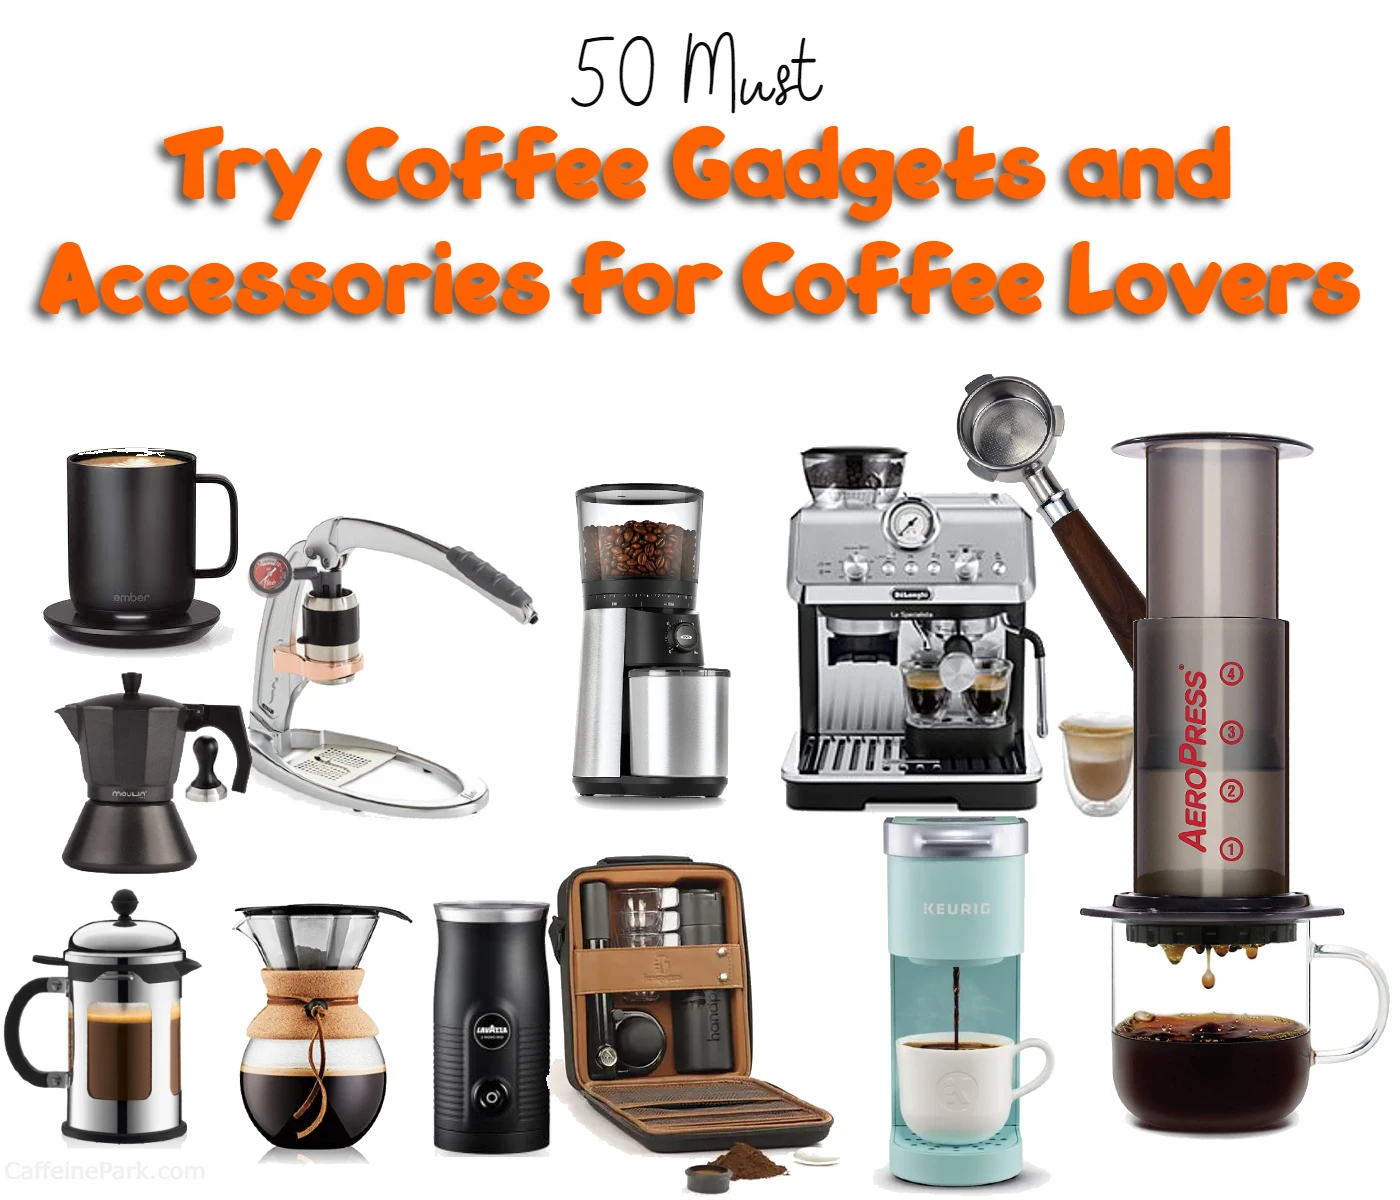 https://caffeinepark.com/wp-content/uploads/2023/03/Coffee-Gadgets-and-Accessories-for-Coffee-Lovers.webp